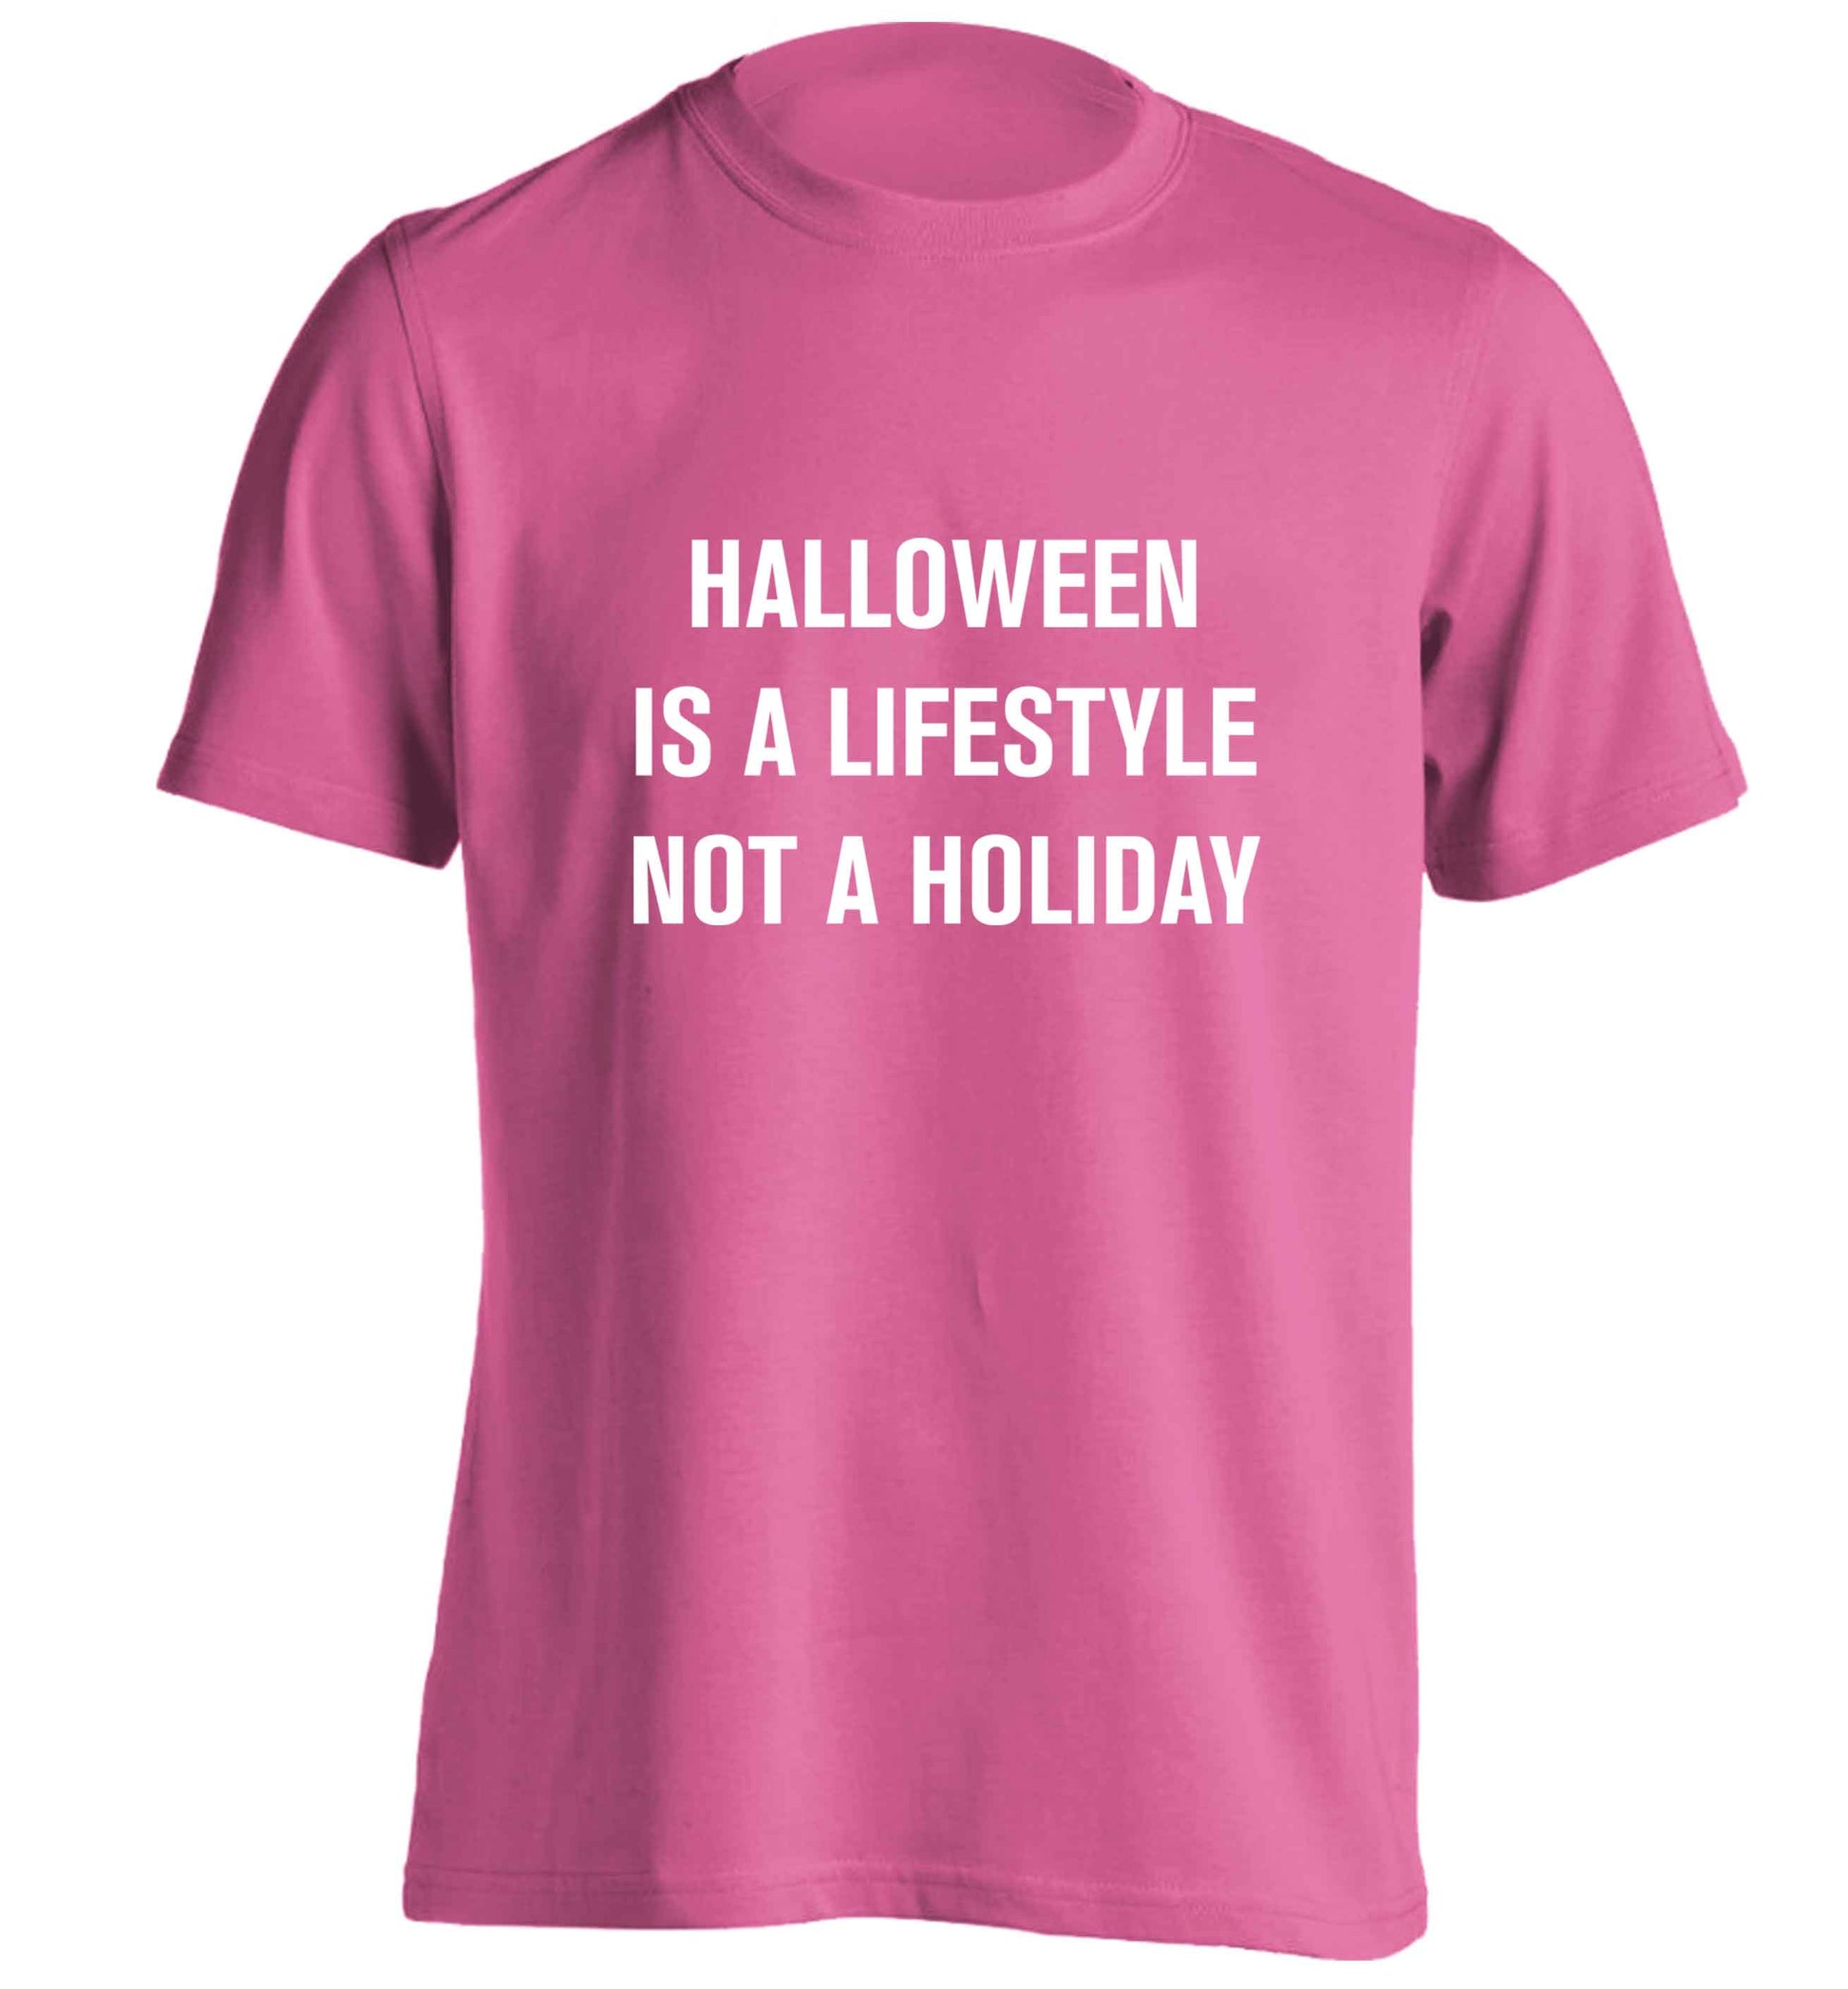 Halloween is a lifestyle not a holiday adults unisex pink Tshirt 2XL